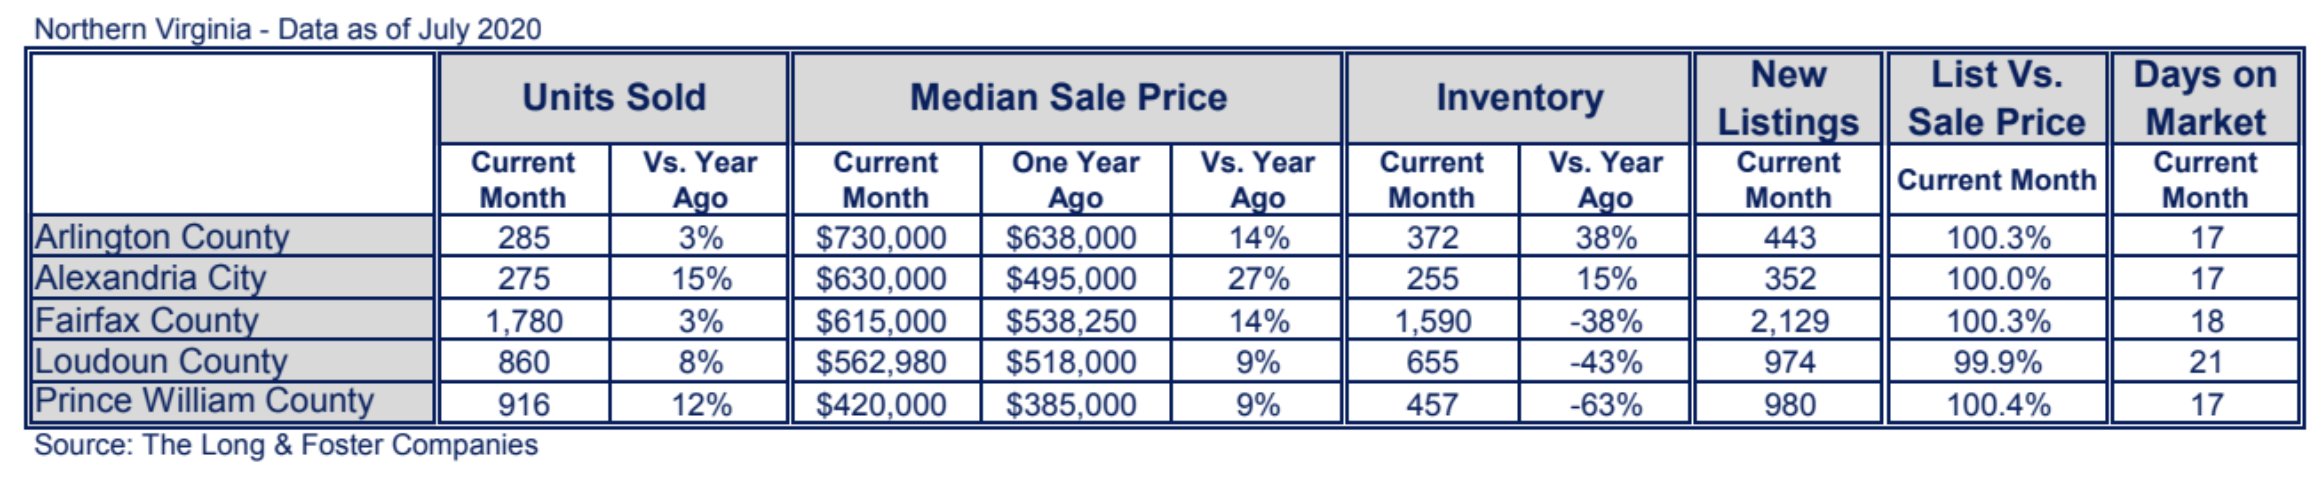 chart of real estate prices in Northern Virginia